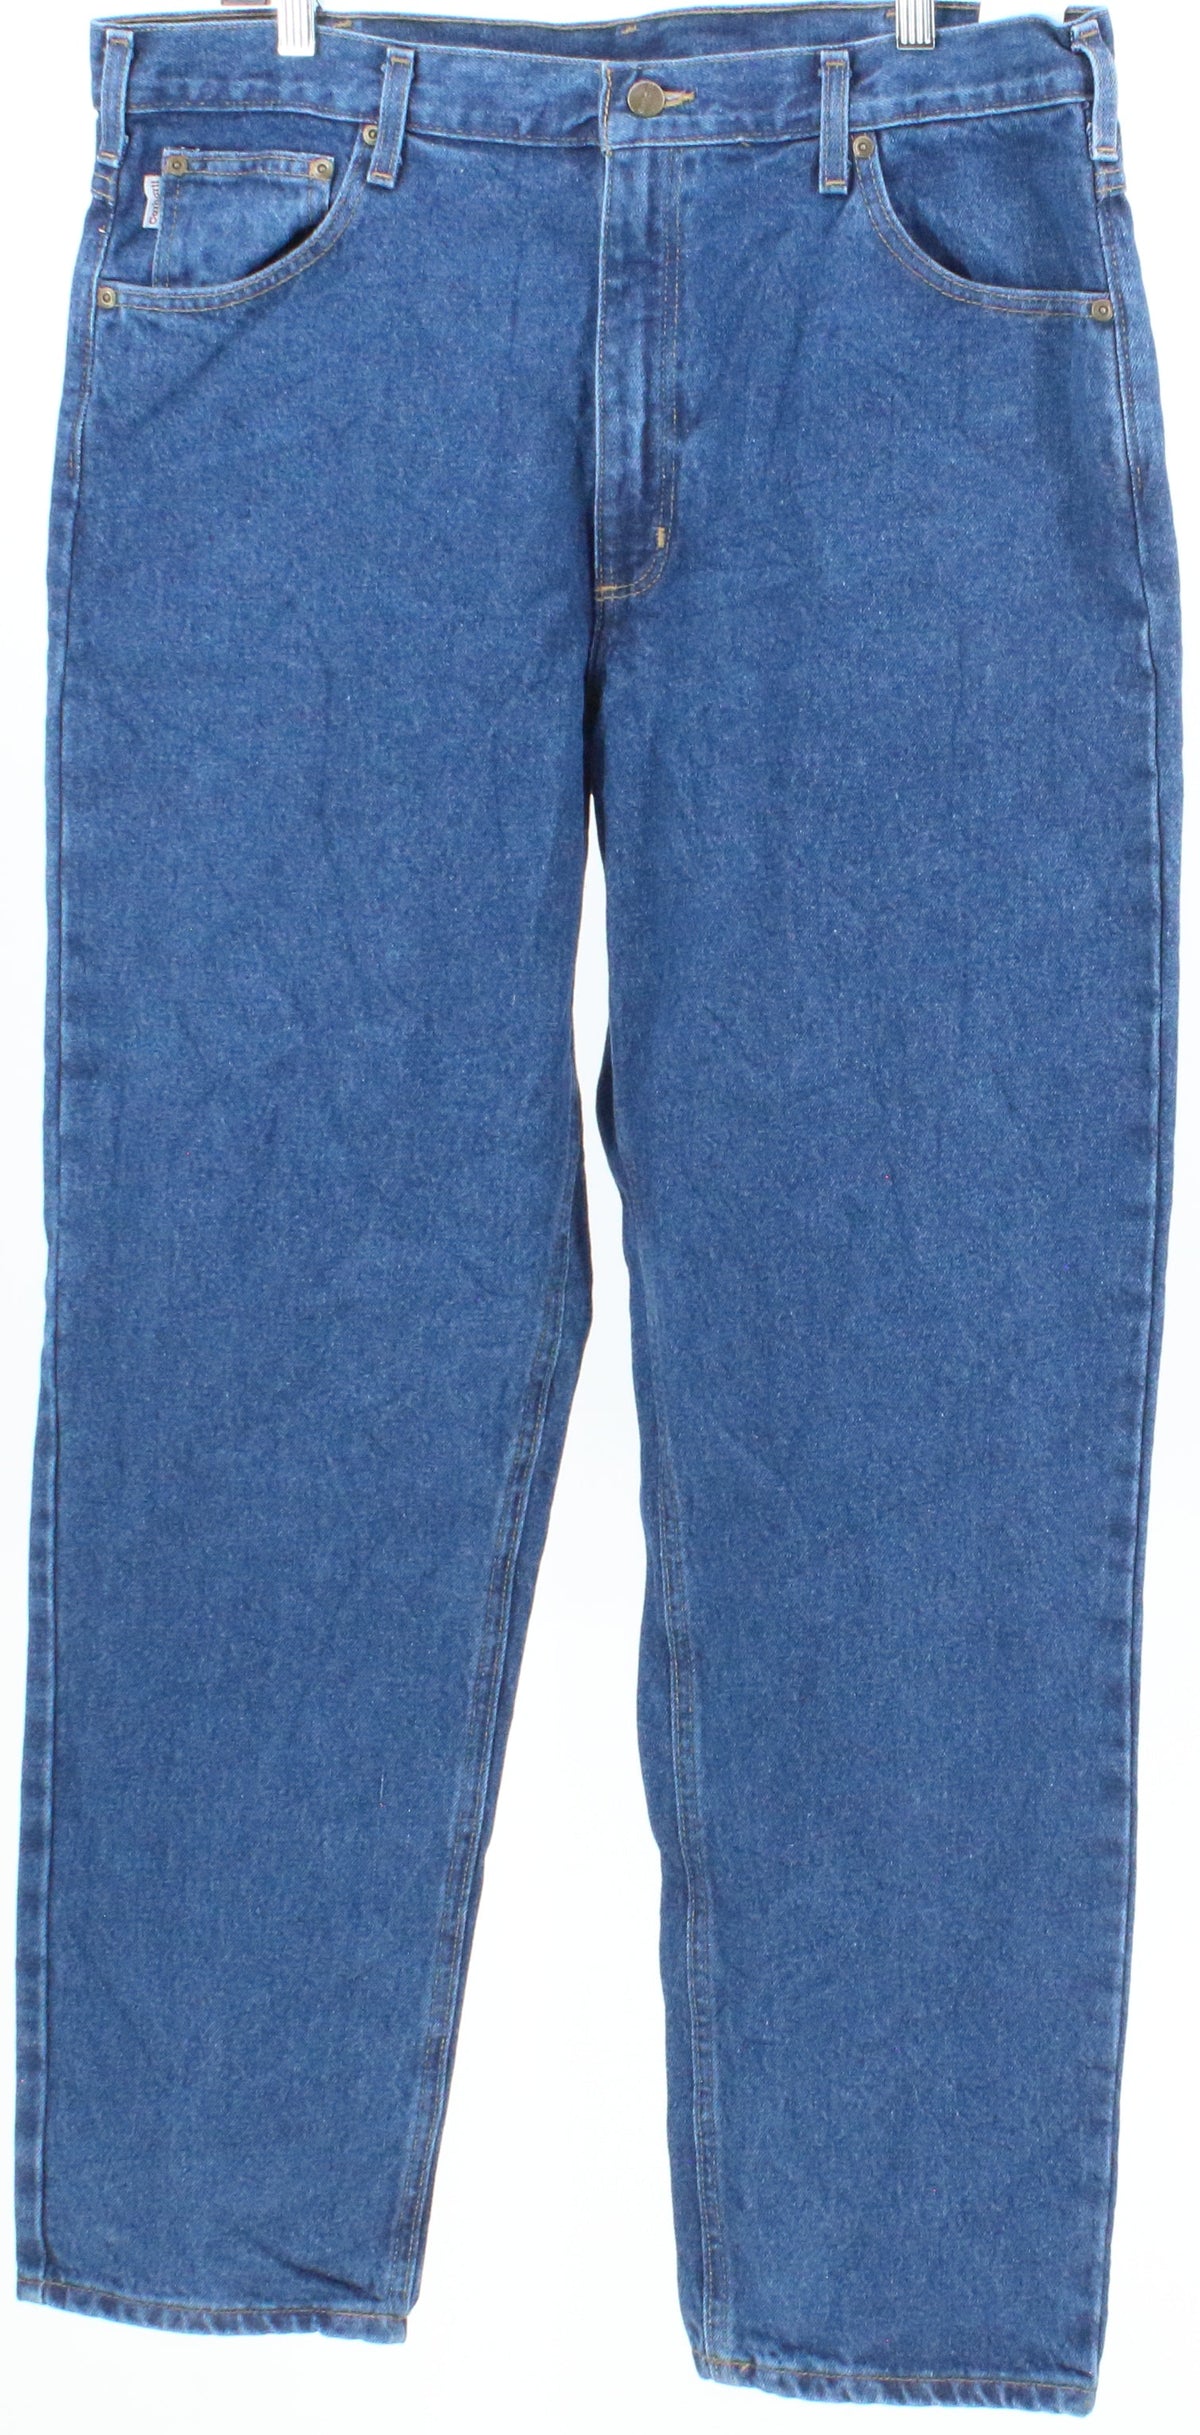 Carhartt Relaxed Fit Blue Jeans